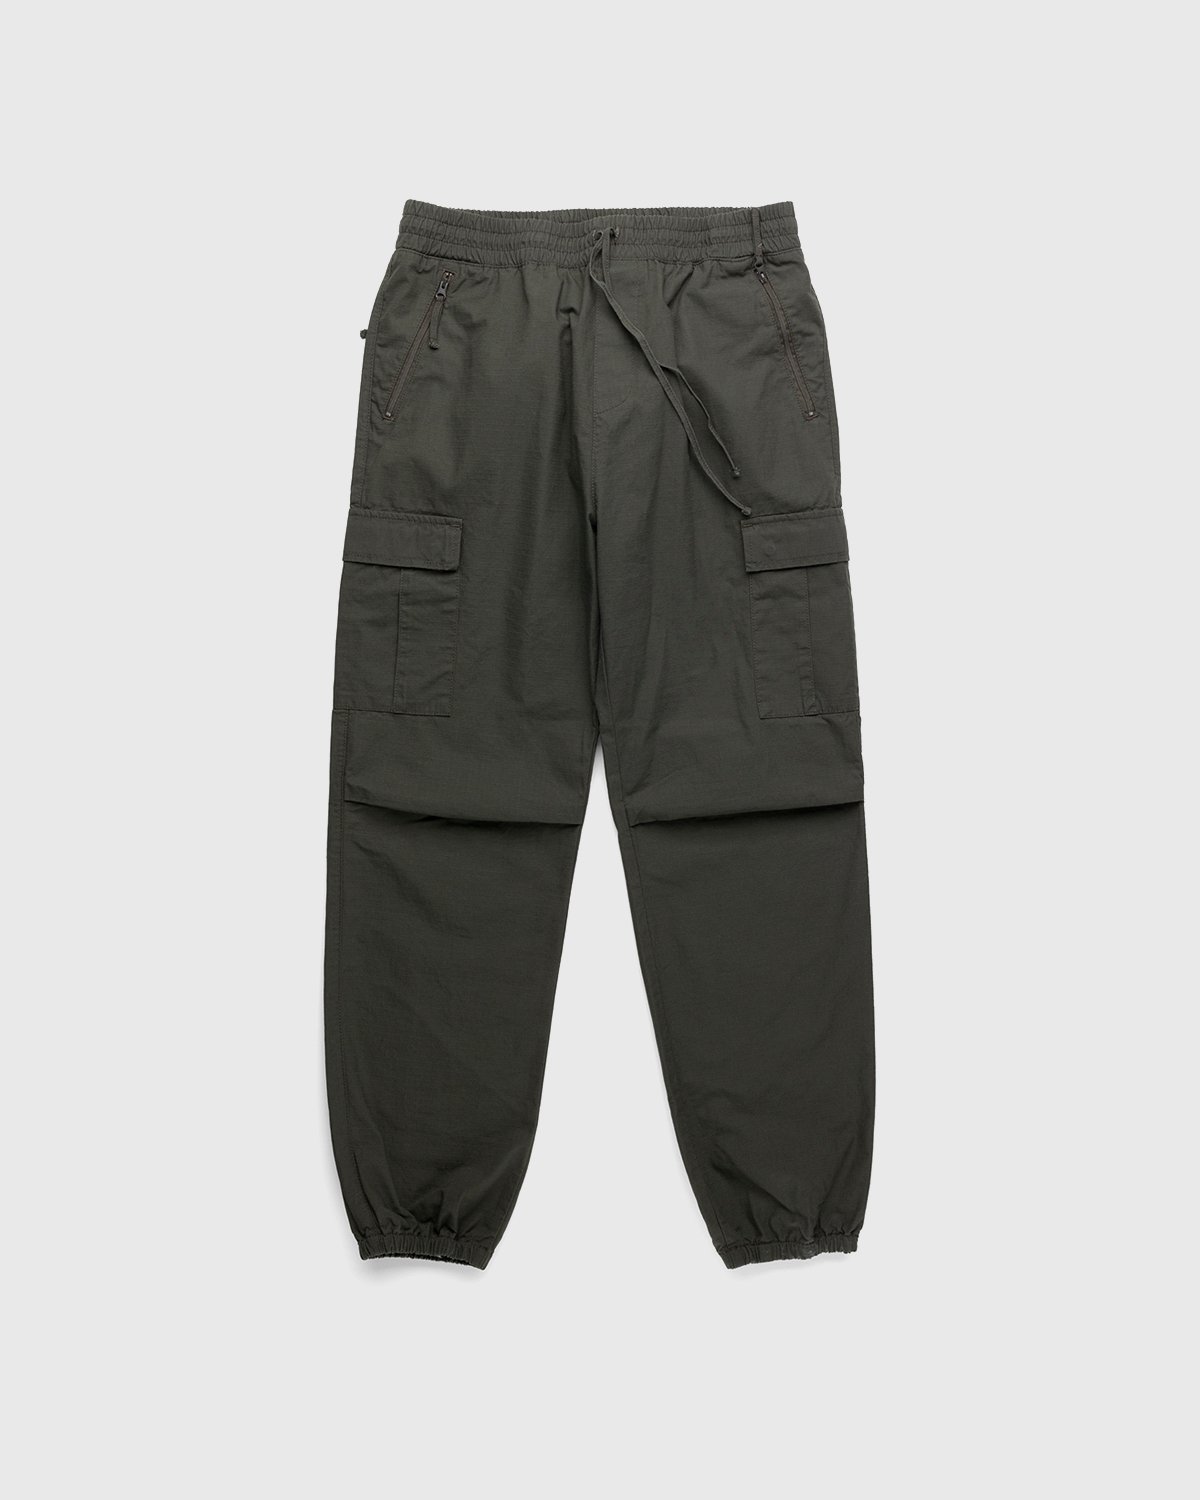 Carhartt WIP - Cargo Jogger Cypress Rinsed - Clothing - Green - Image 1